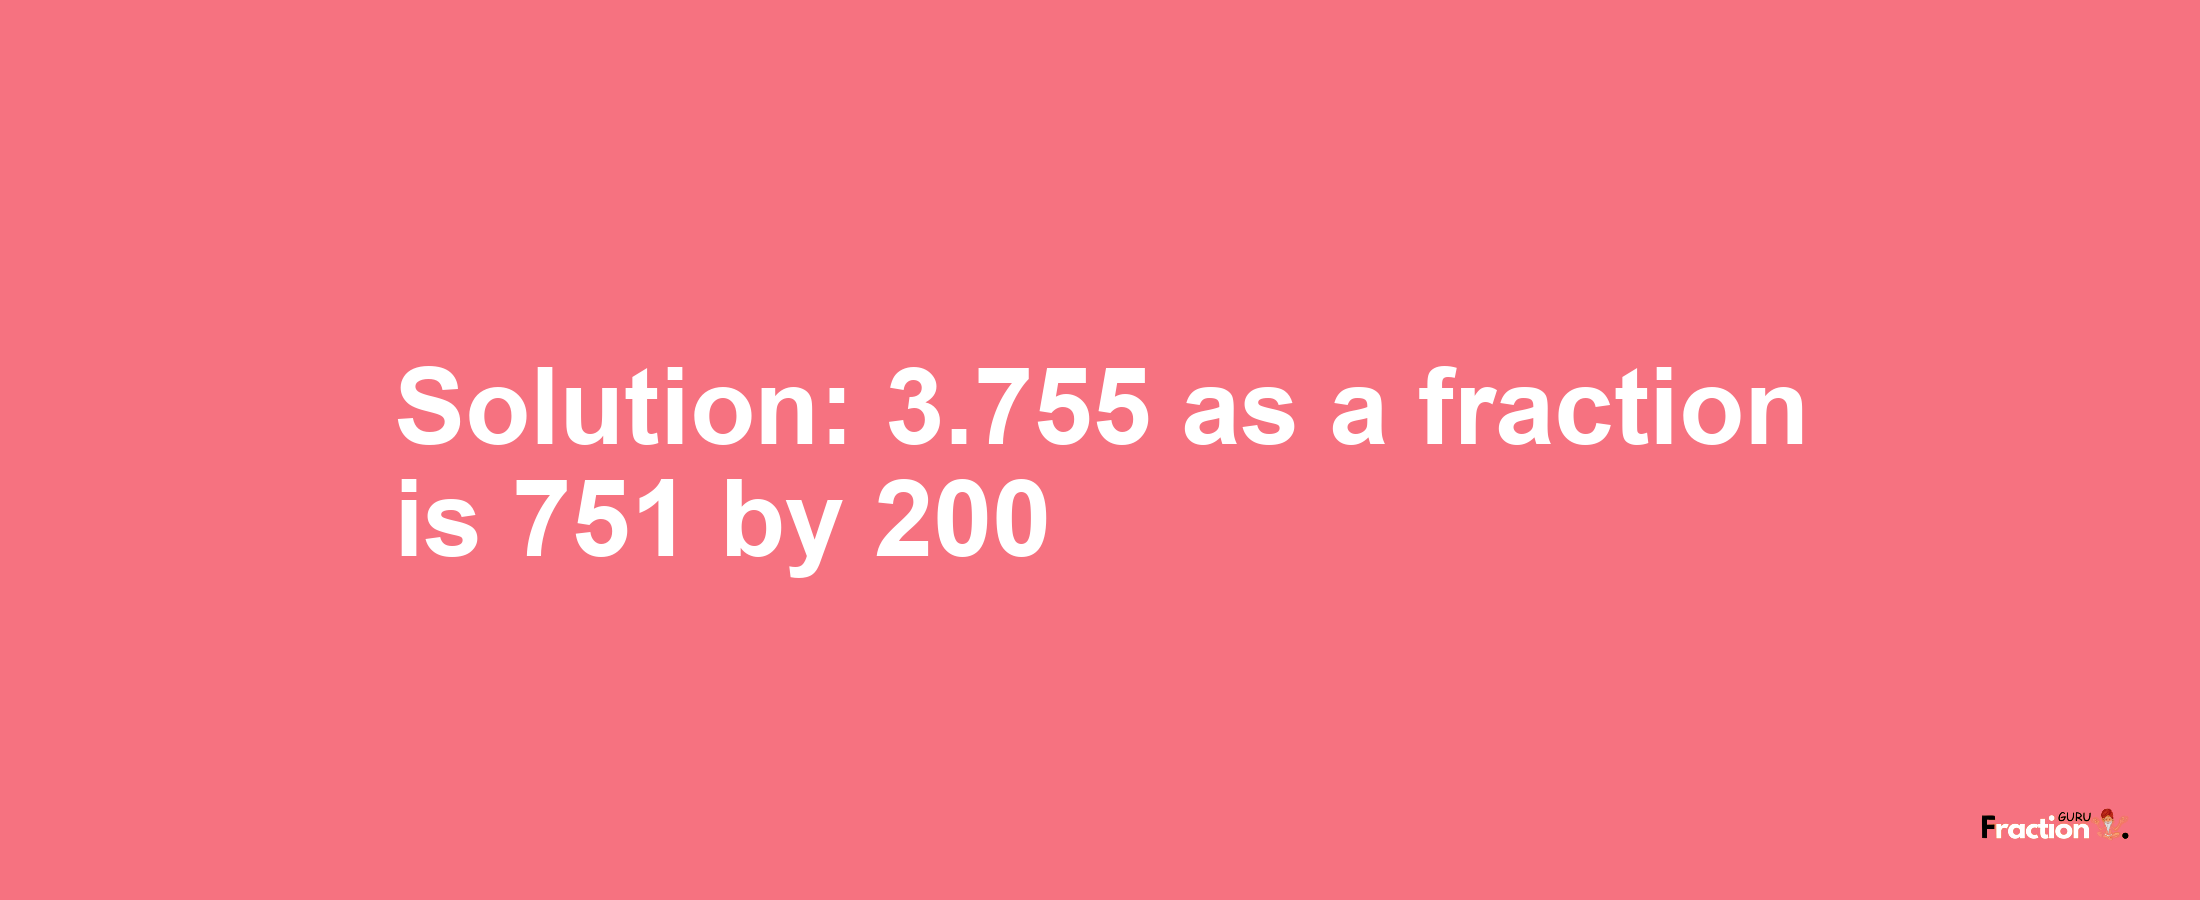 Solution:3.755 as a fraction is 751/200